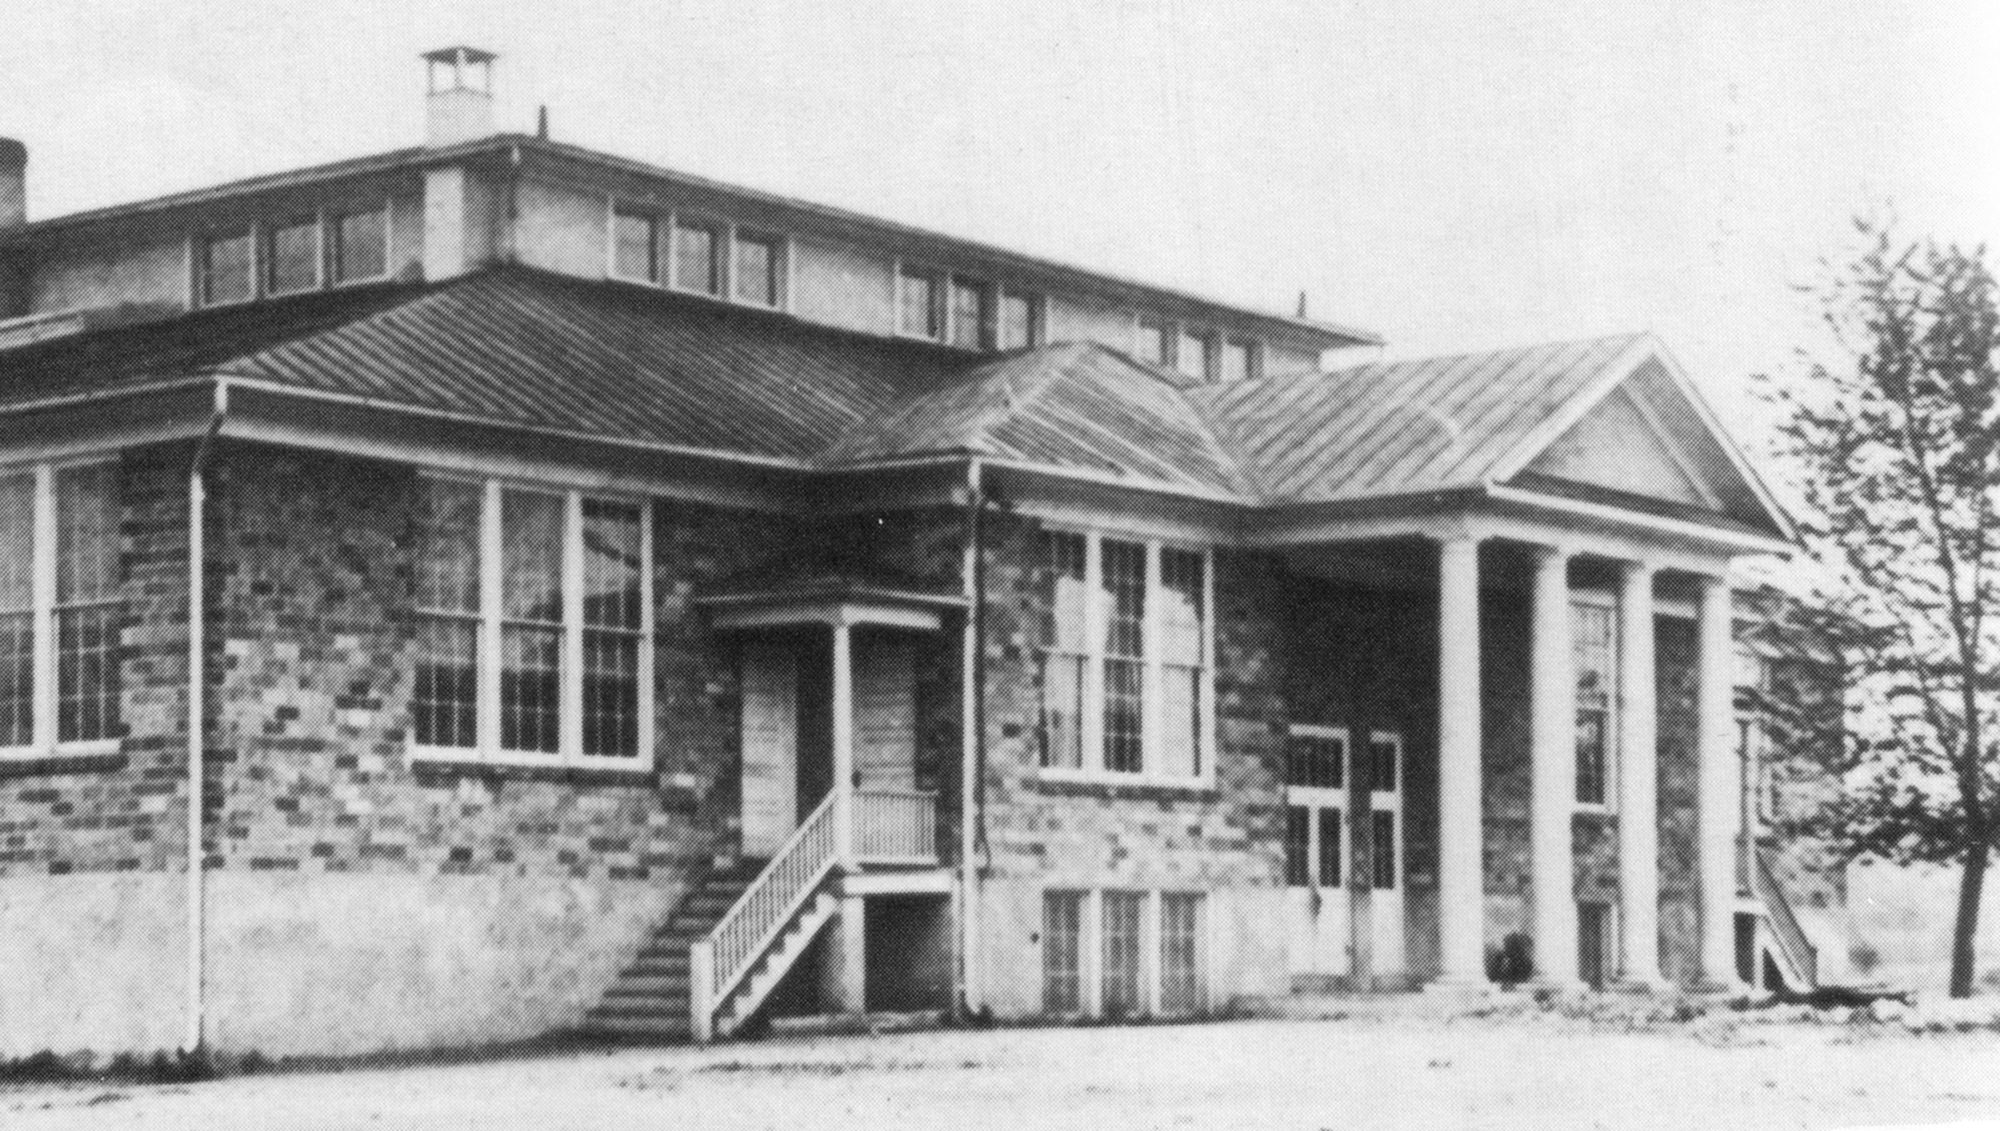 Black and white photo of Vienna Elementary School, Opened in 1923